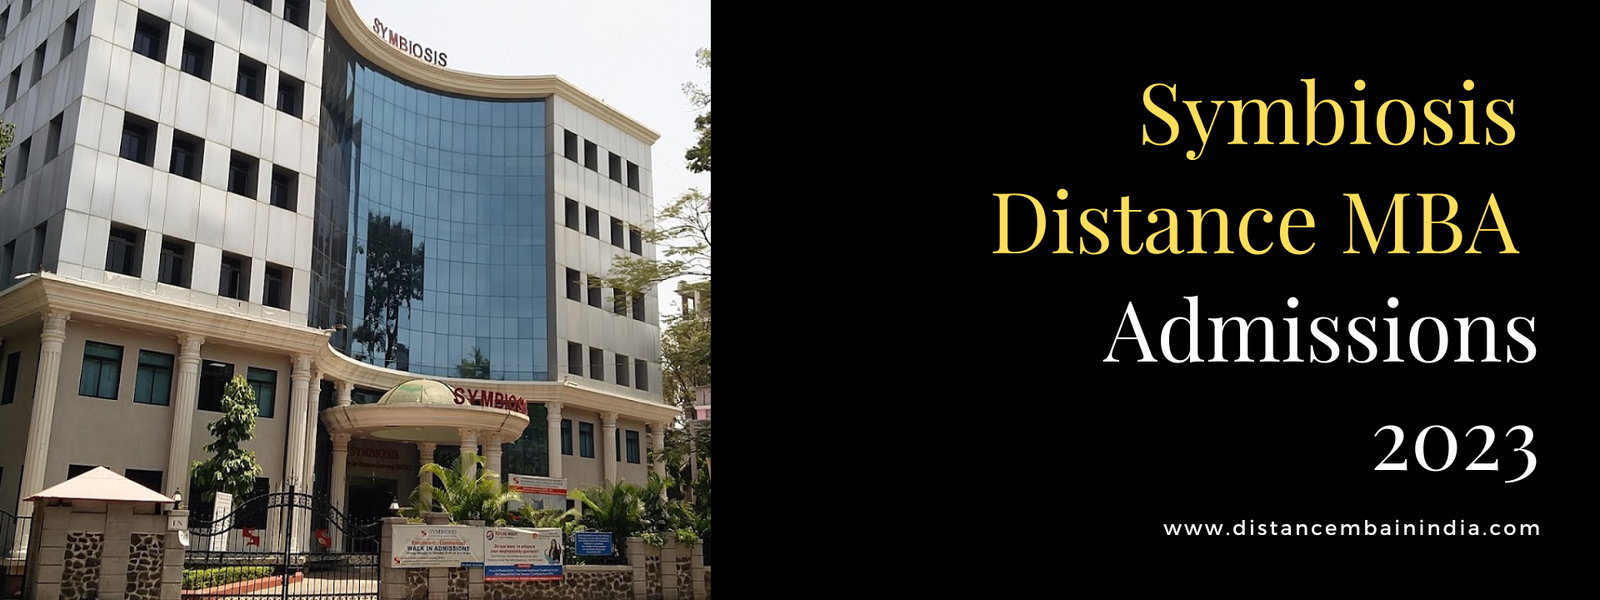 Symbiosis Distance MBA Admissions